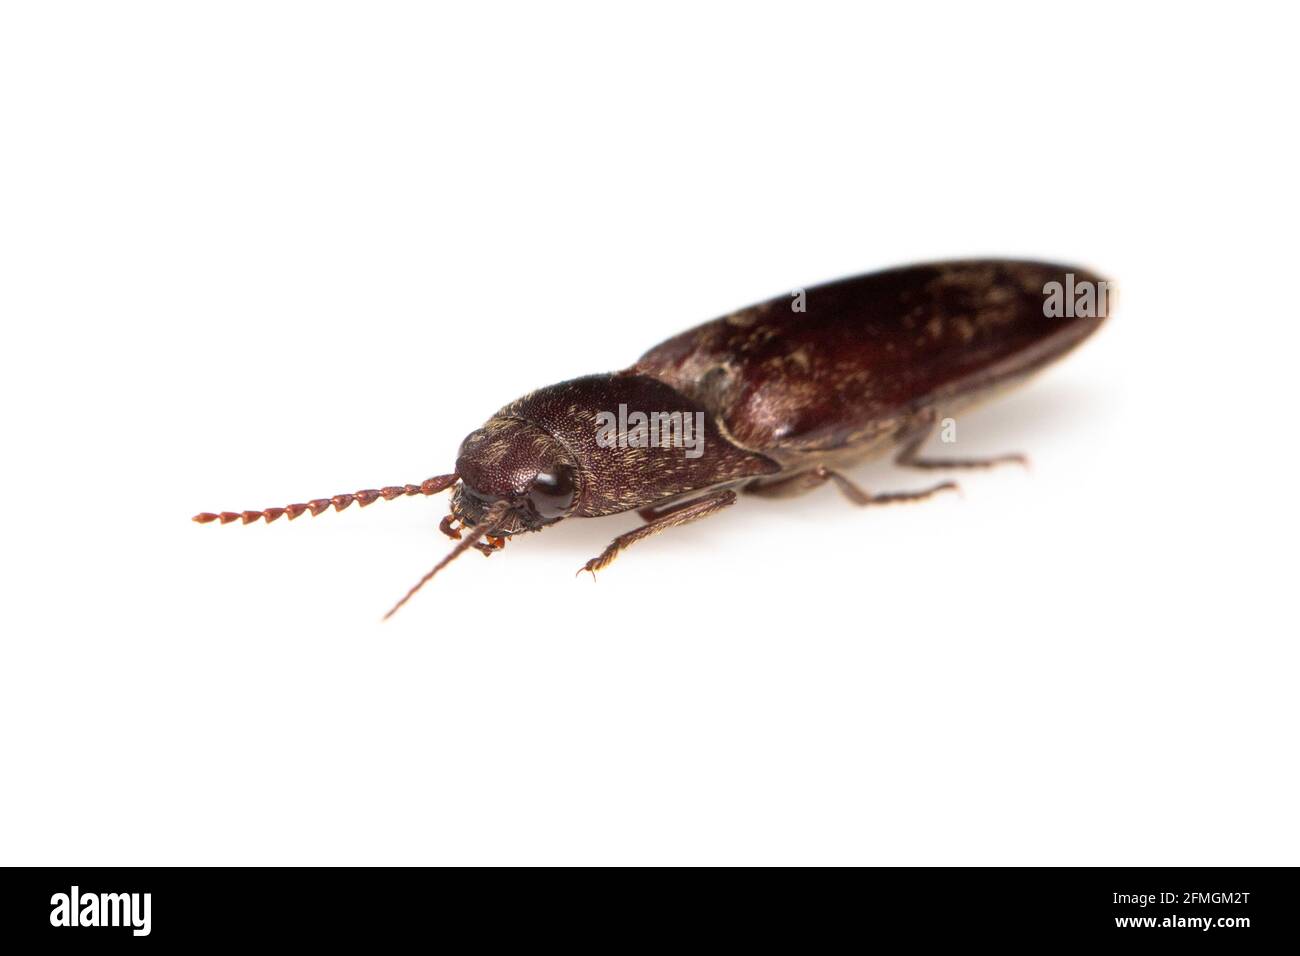 Image of click beetle isolated on white background. Insect. Animal. Stock Photo